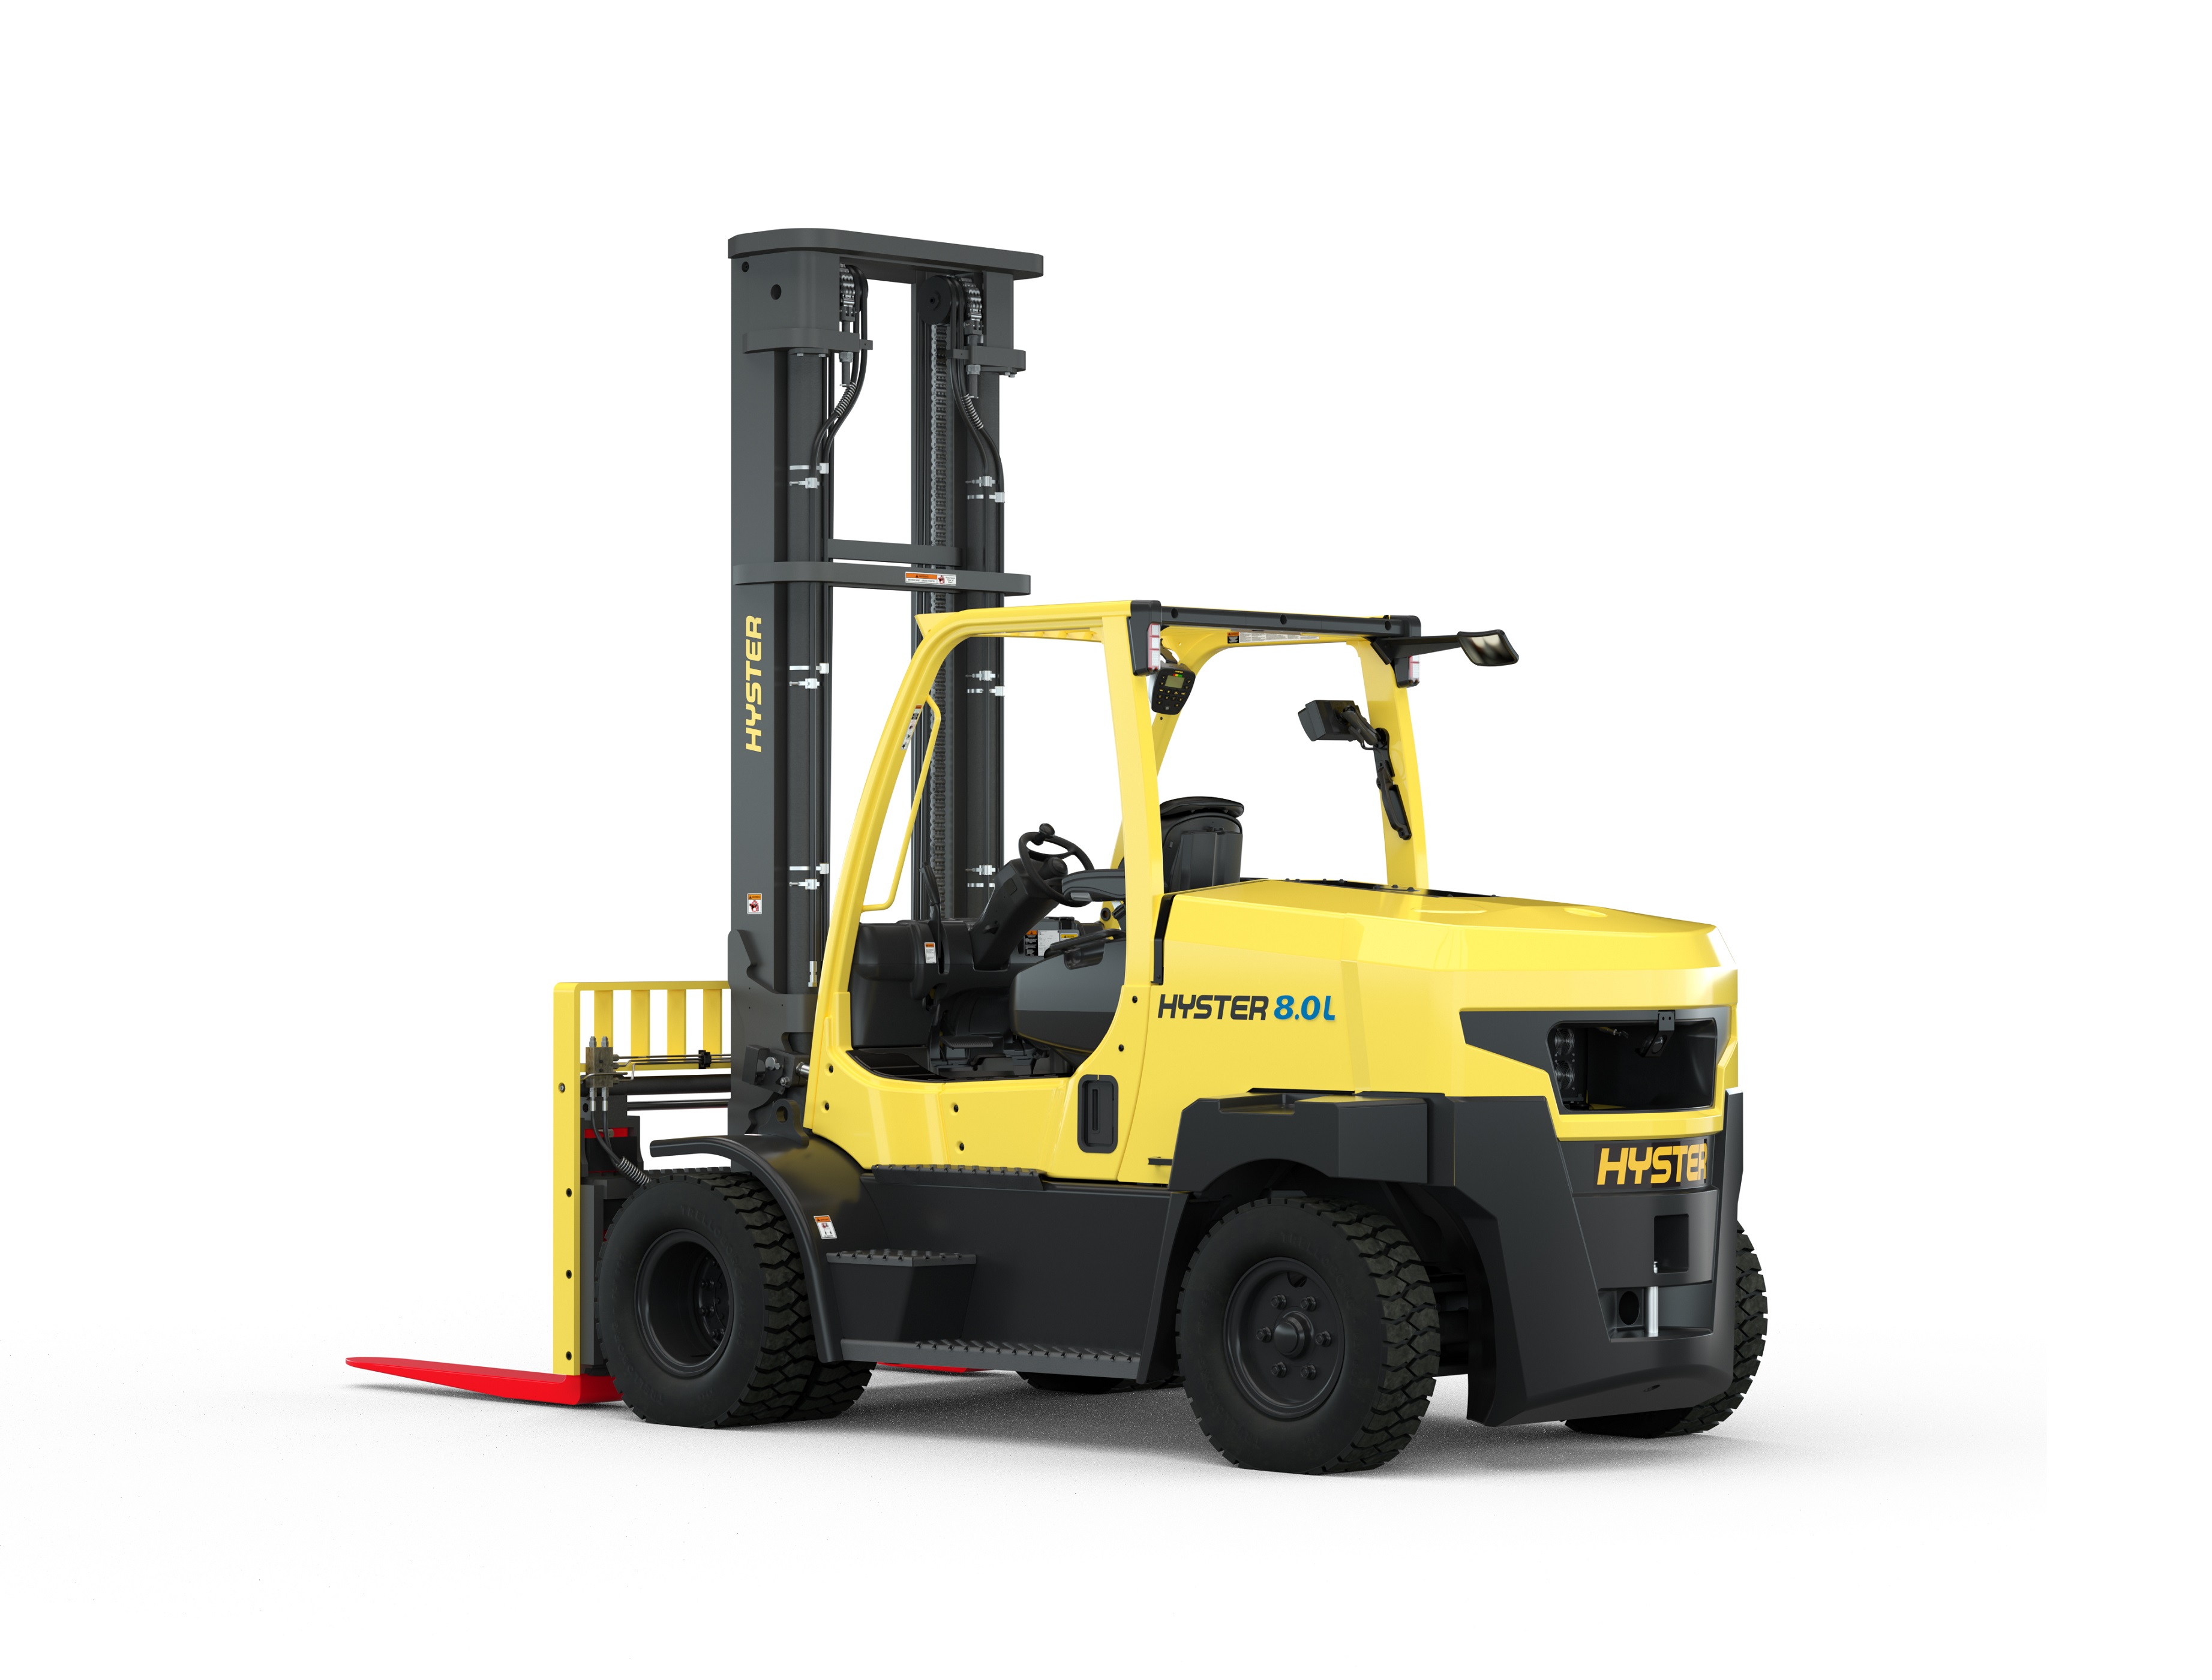 Hyster 8.0L (Image source: Hyster Europe)